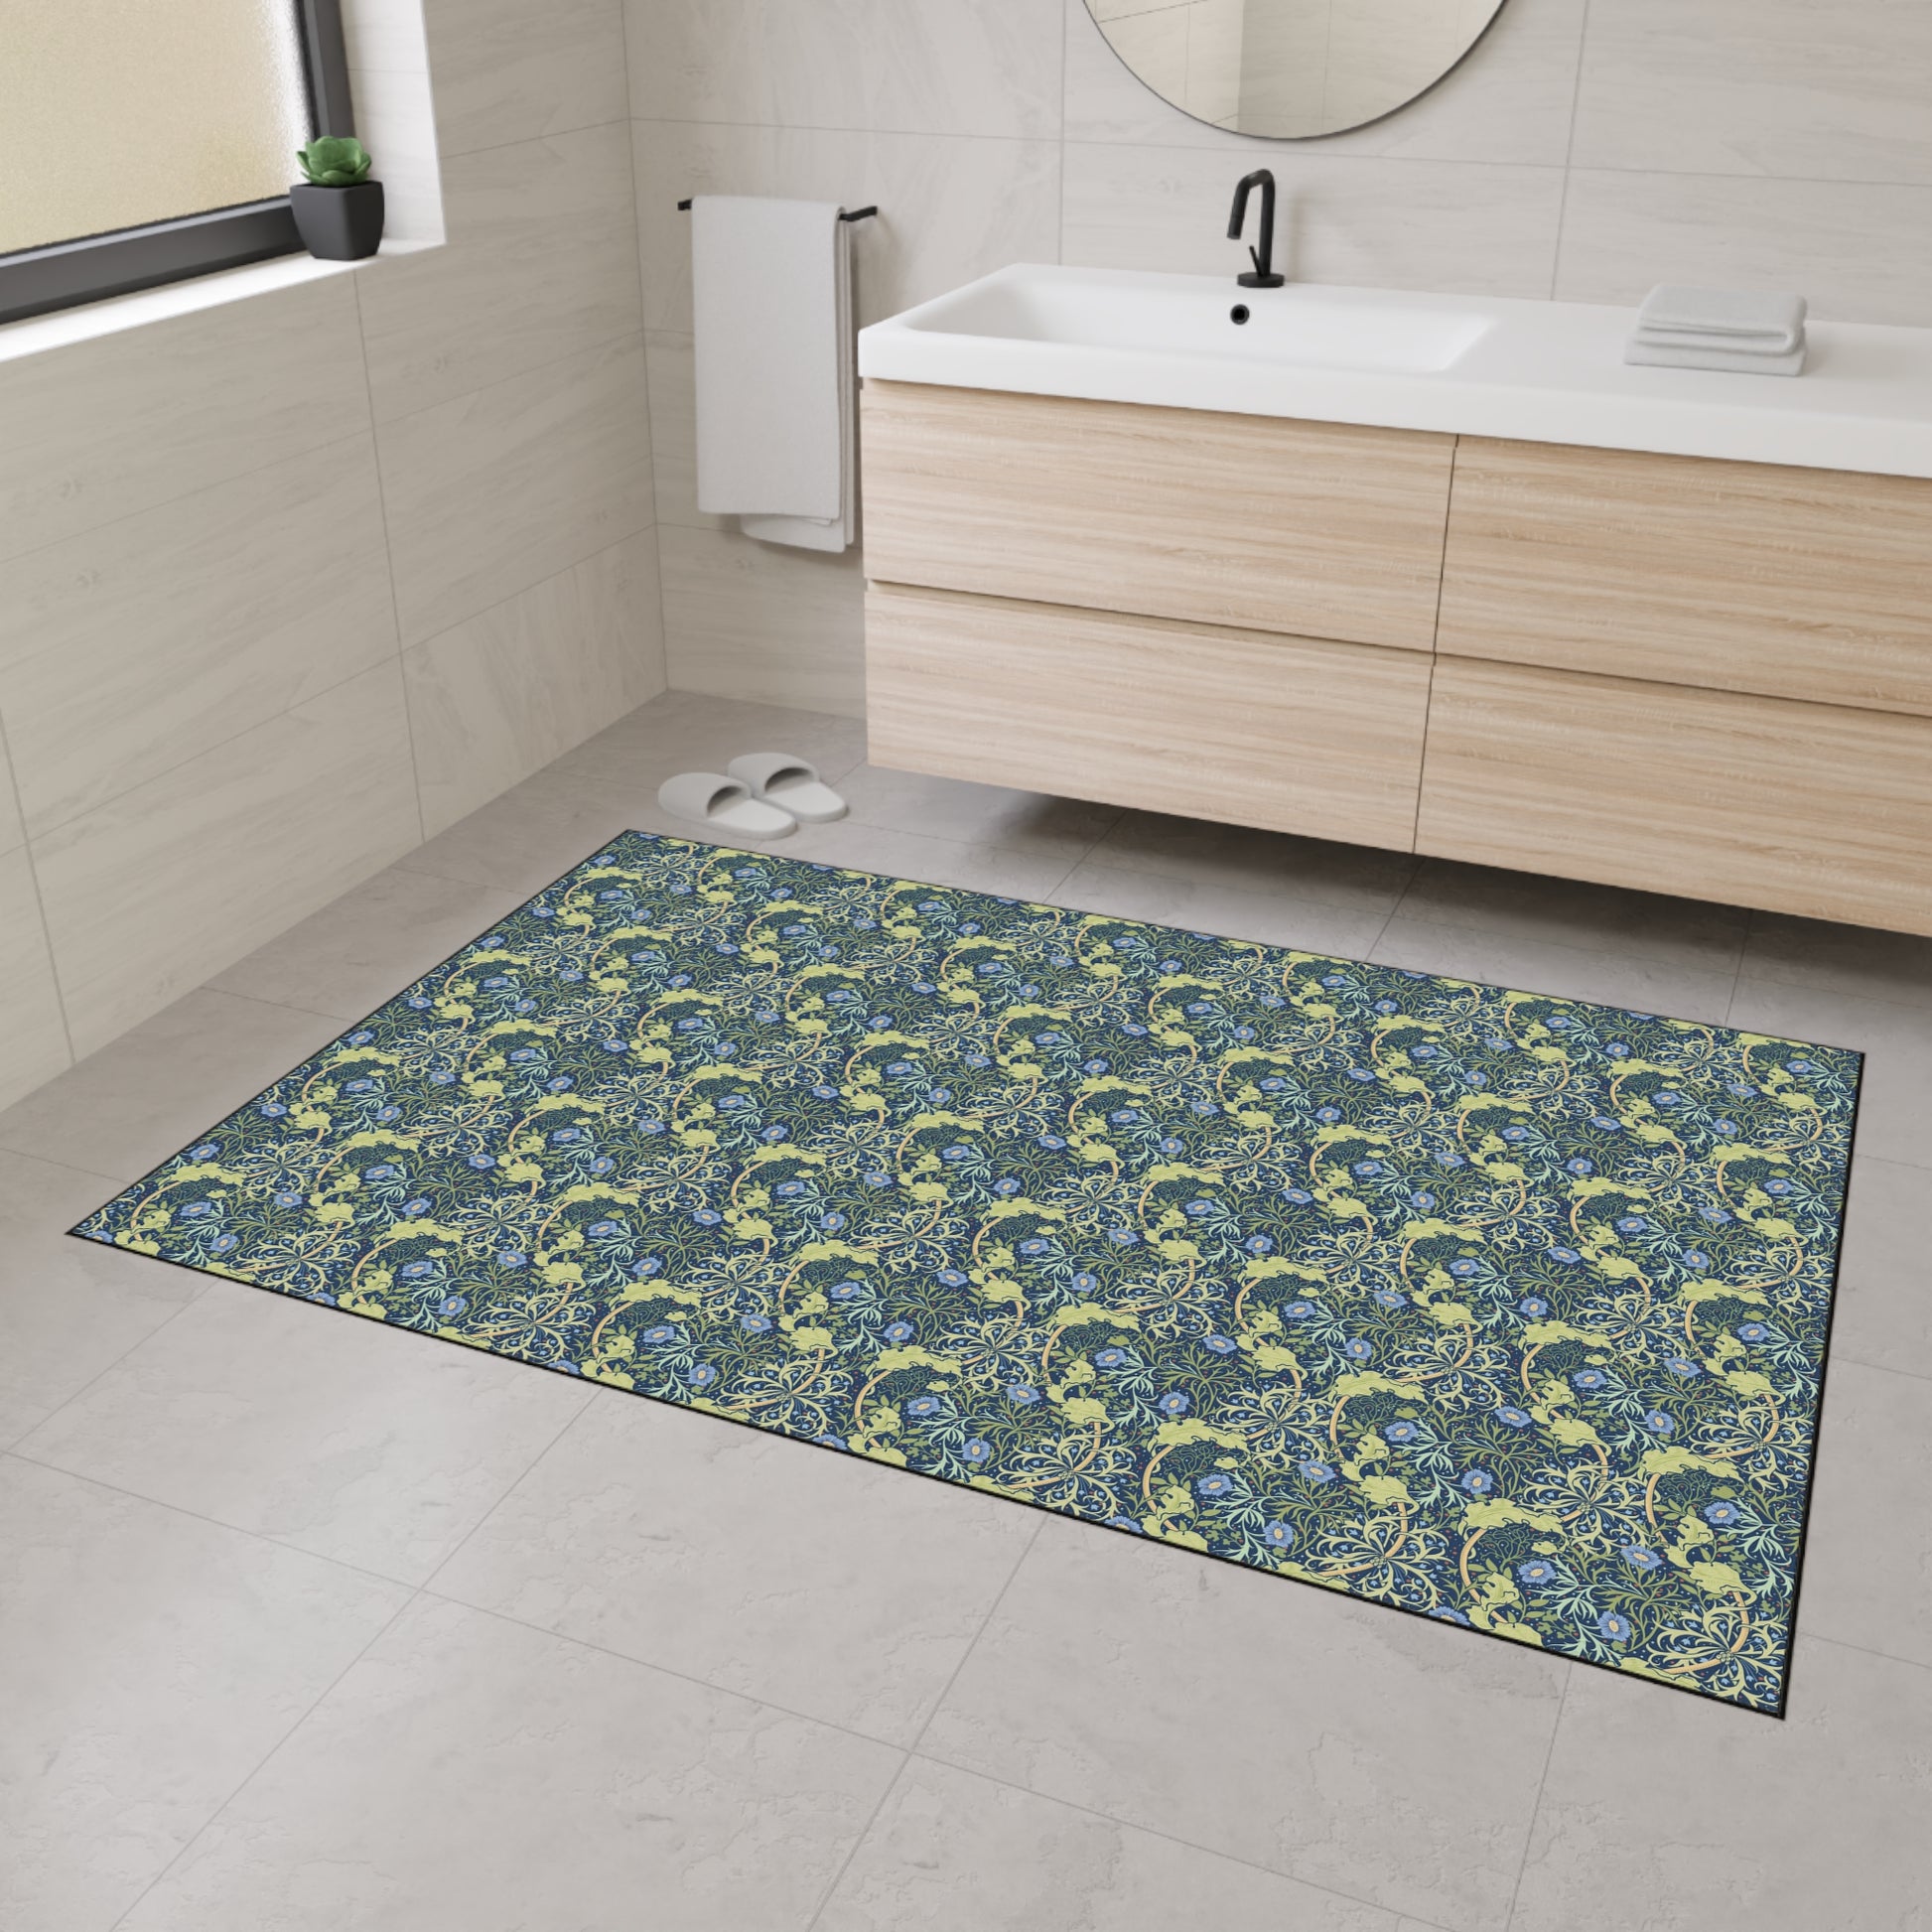 william-morris-co-heavy-duty-floor-mat-seaweed-collection-blue-flowers-8